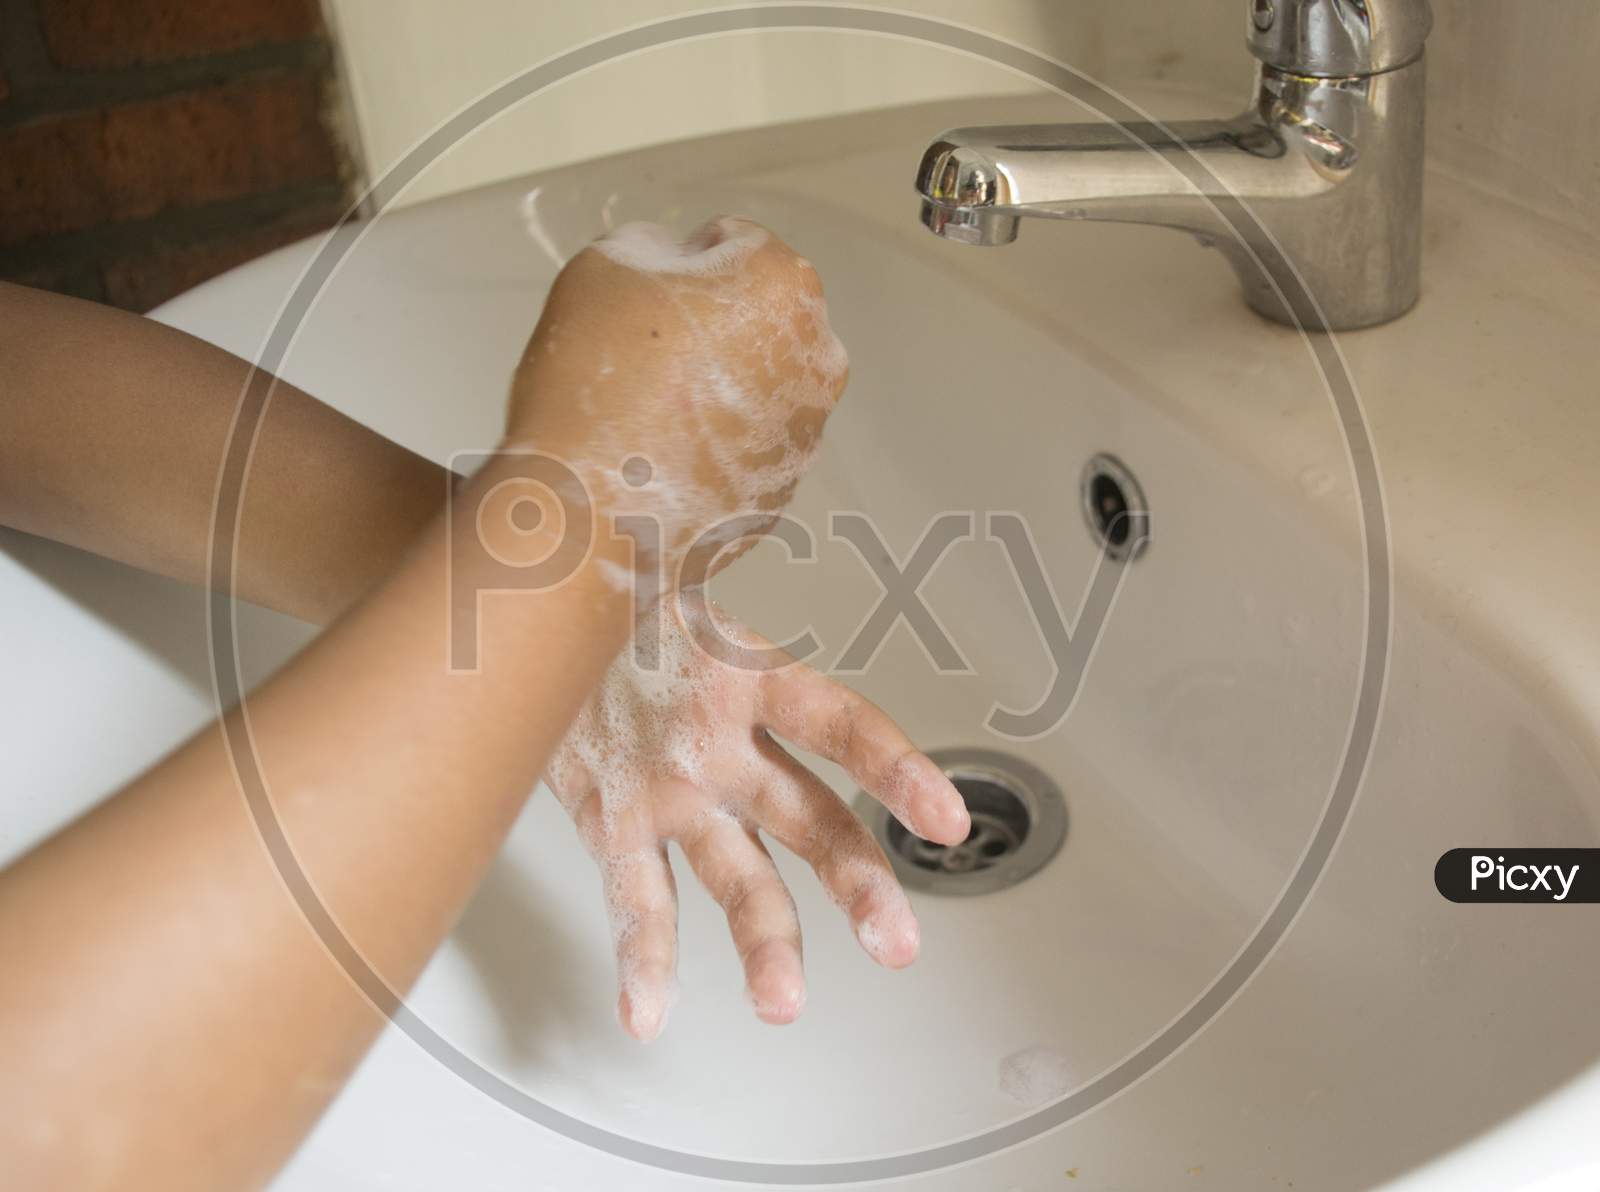 Washing Hands With Foamy Hand Soap By Twist Rubbing Thumbs Over The Sink